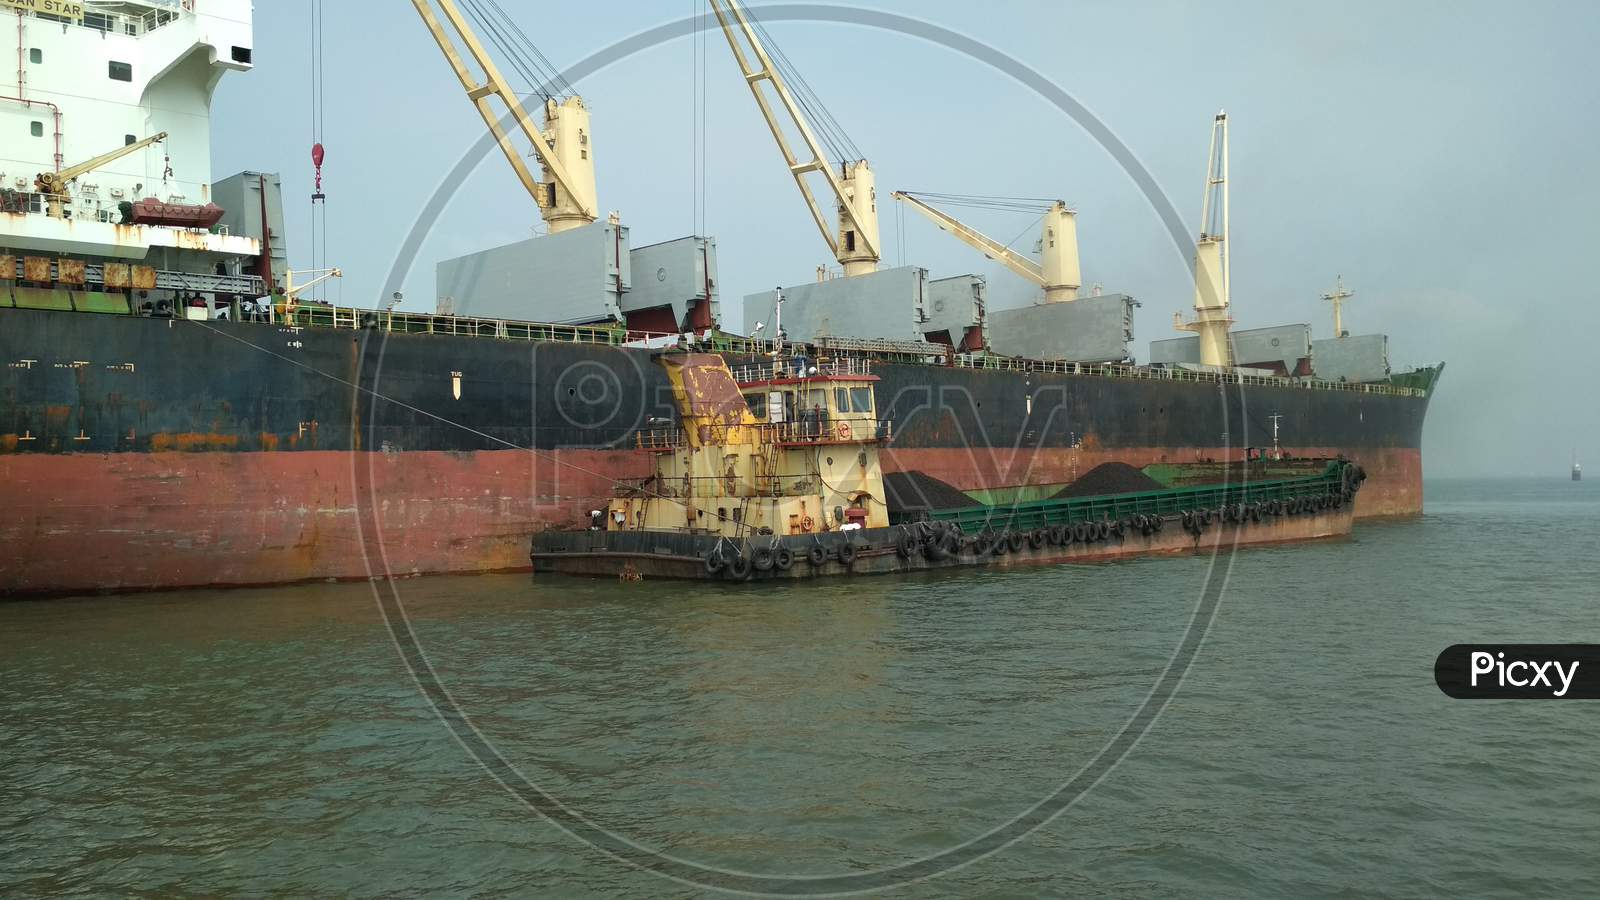 unloading of coal from a Container Ship, Mumbai Port